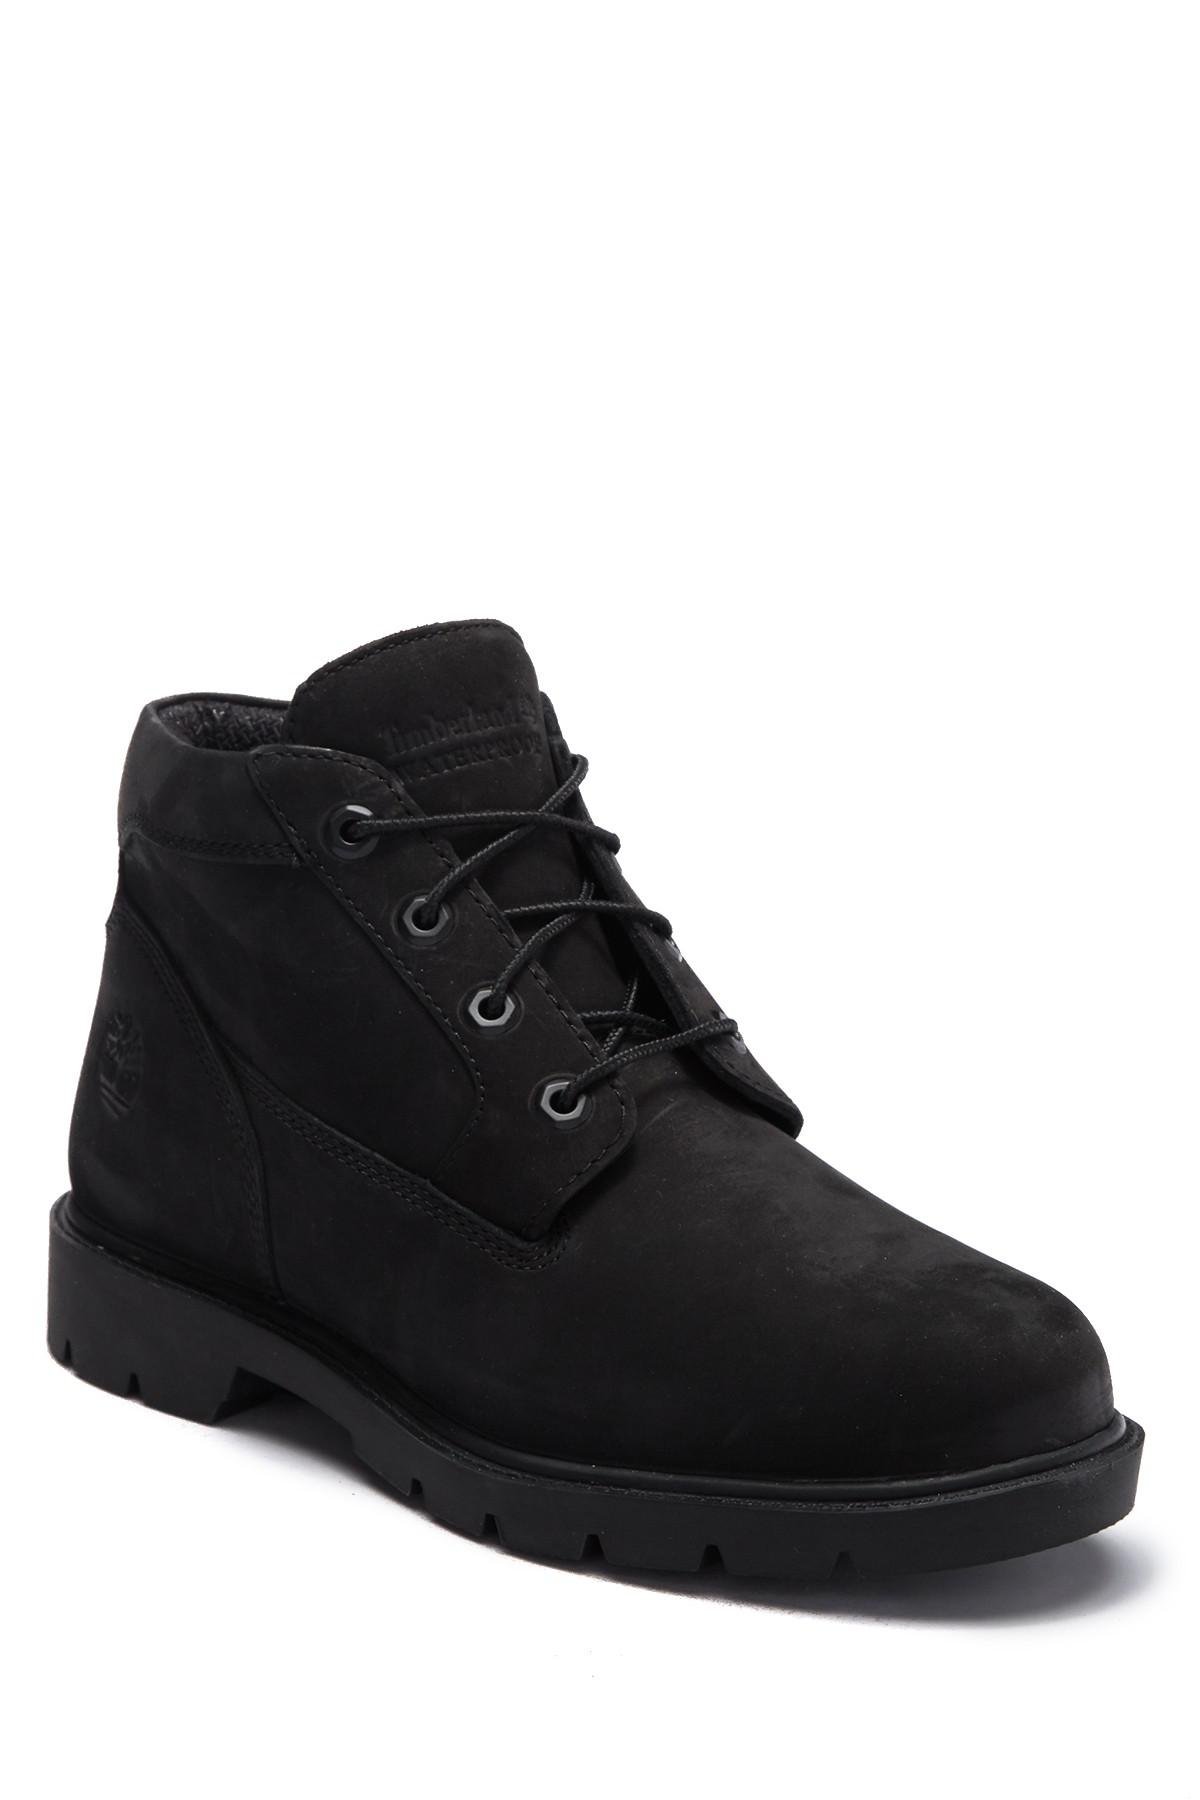 Timberland Value Suede Chukka Boot - Wide Width Available in Black Men | Lyst